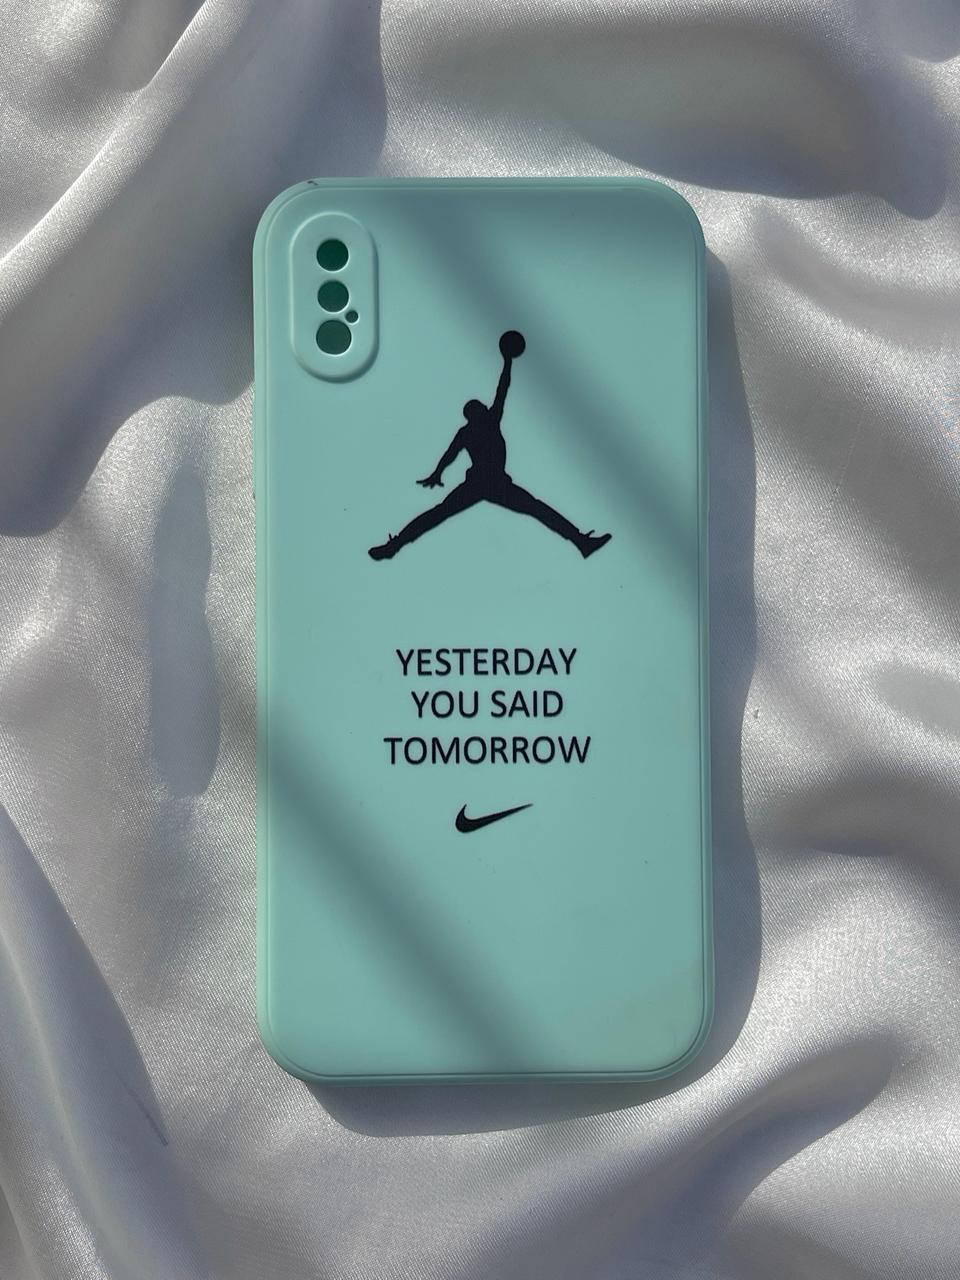 iPhone "X/XS" Silicone Case "Yesterday You Said Tomorrow" Edition